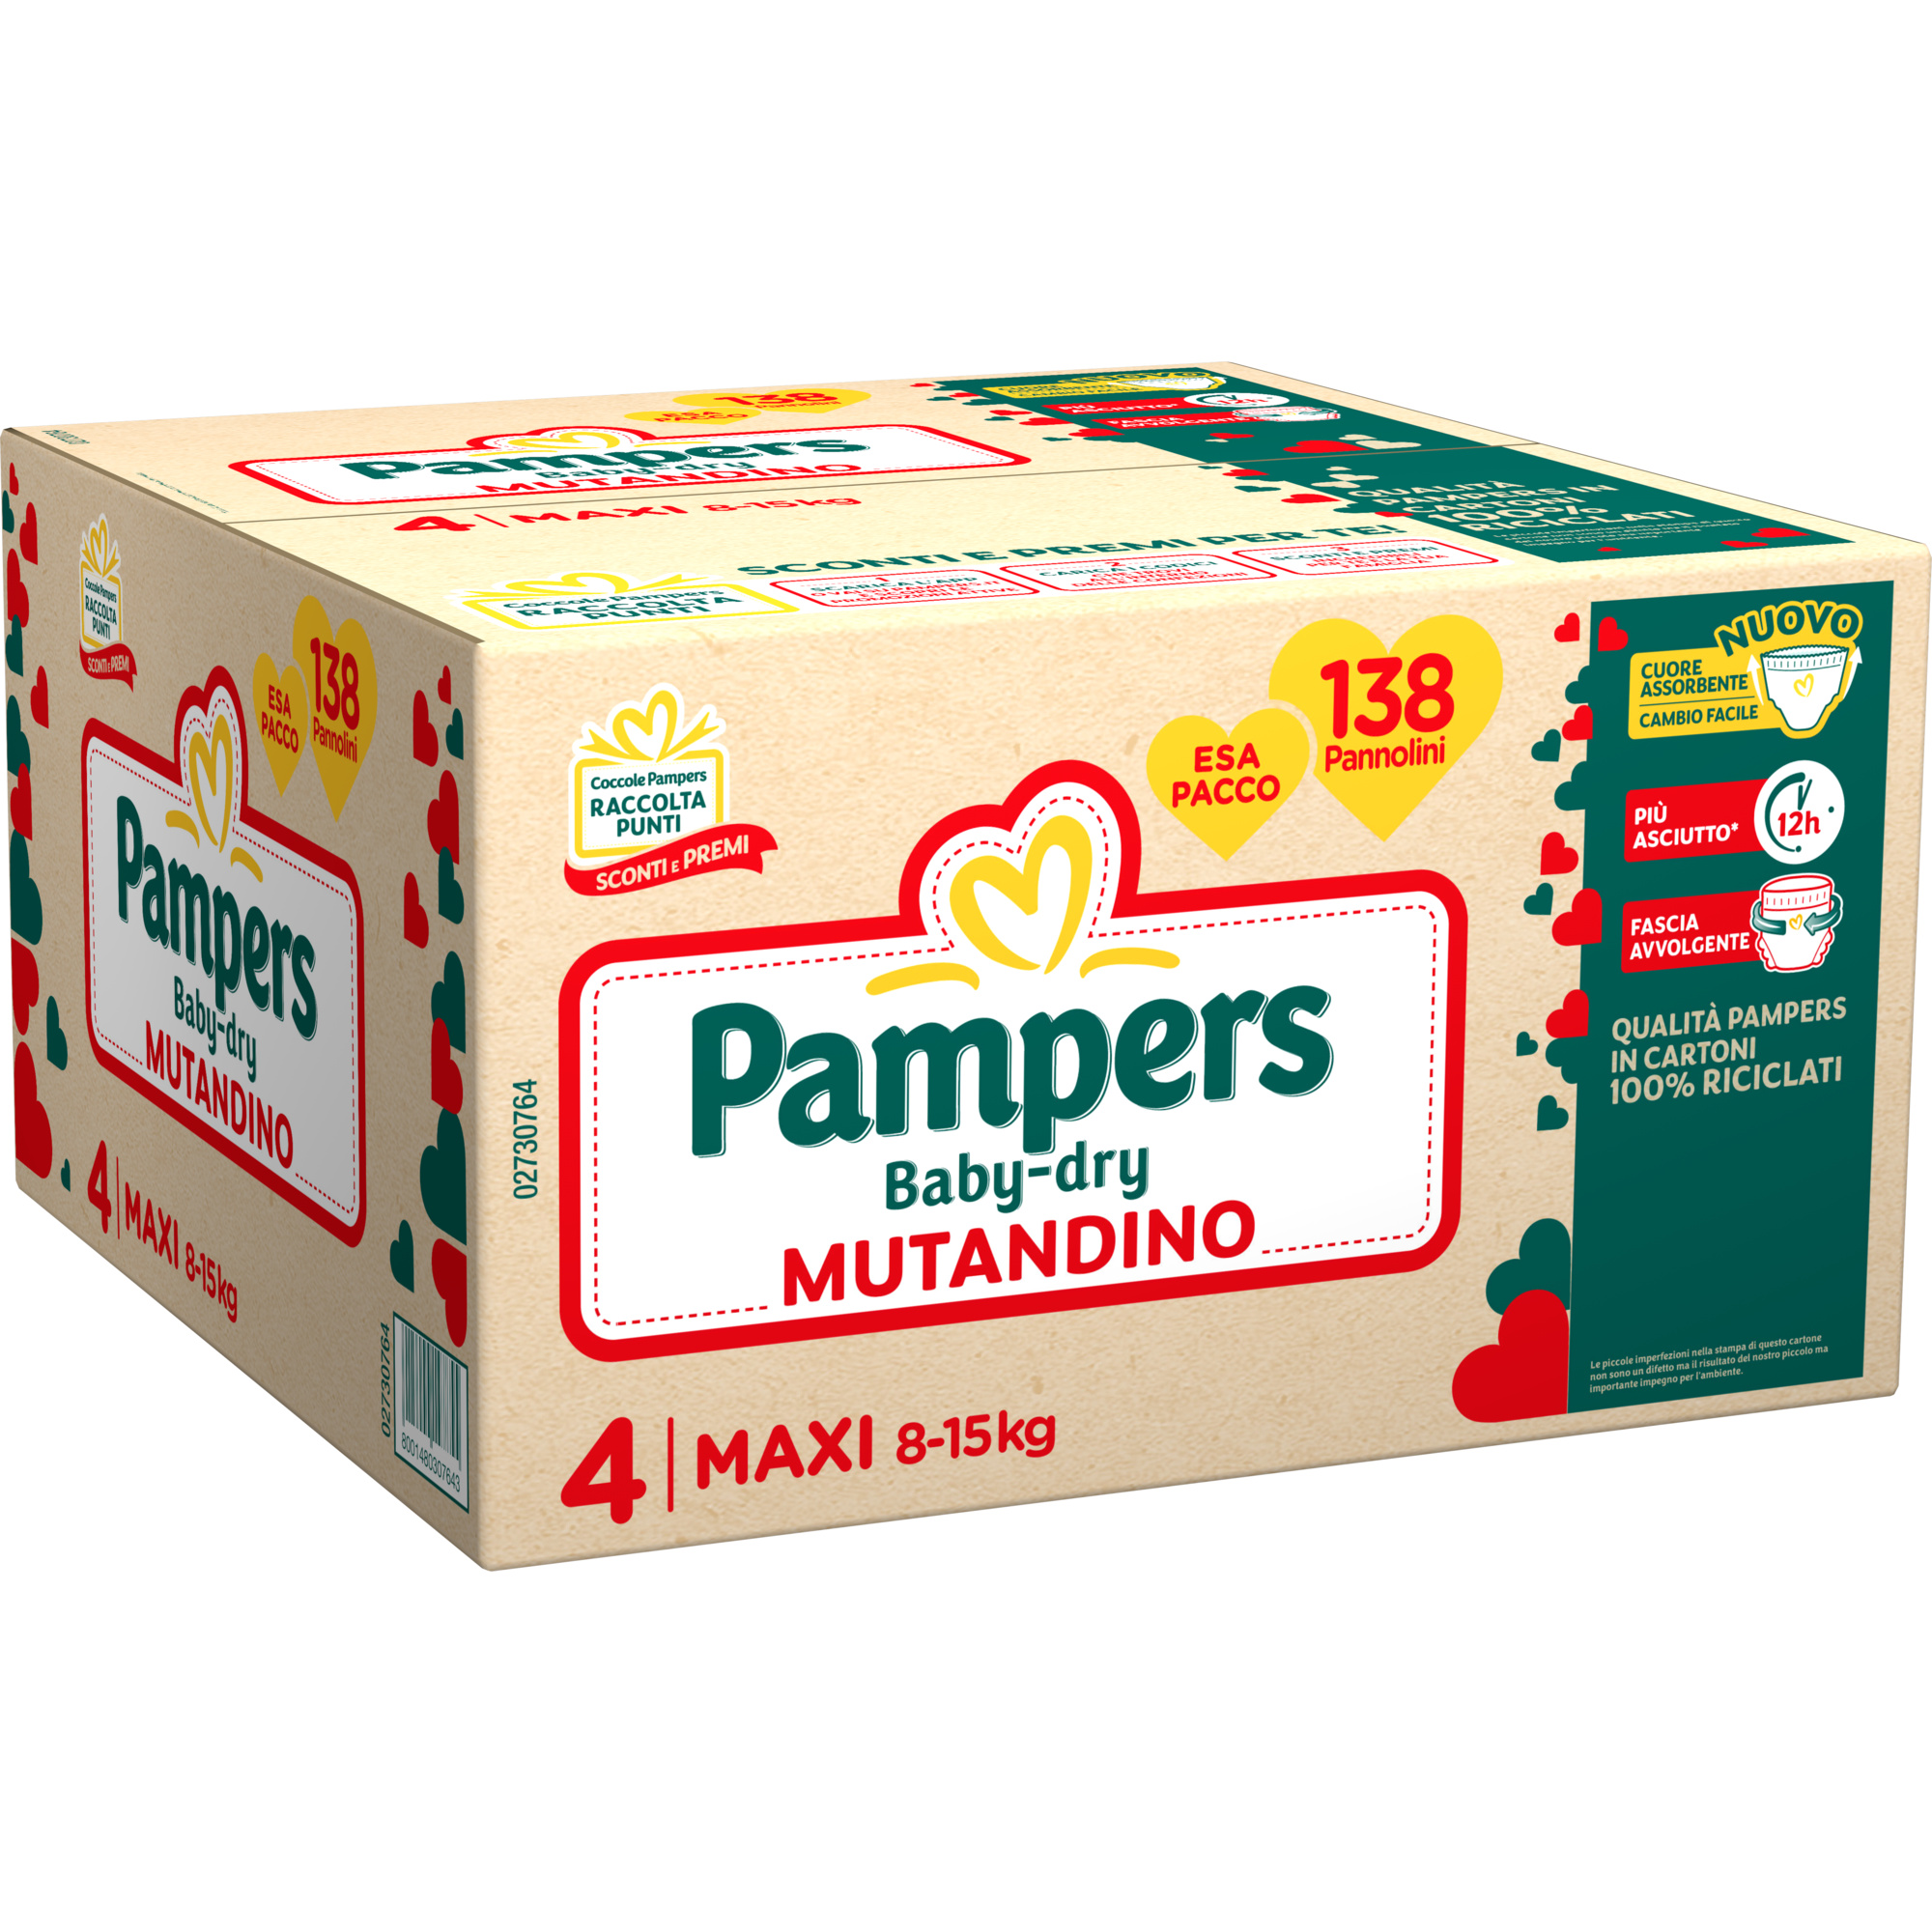 Pampers - esa pack babydry mutandino maxi 138 pz - Pampers